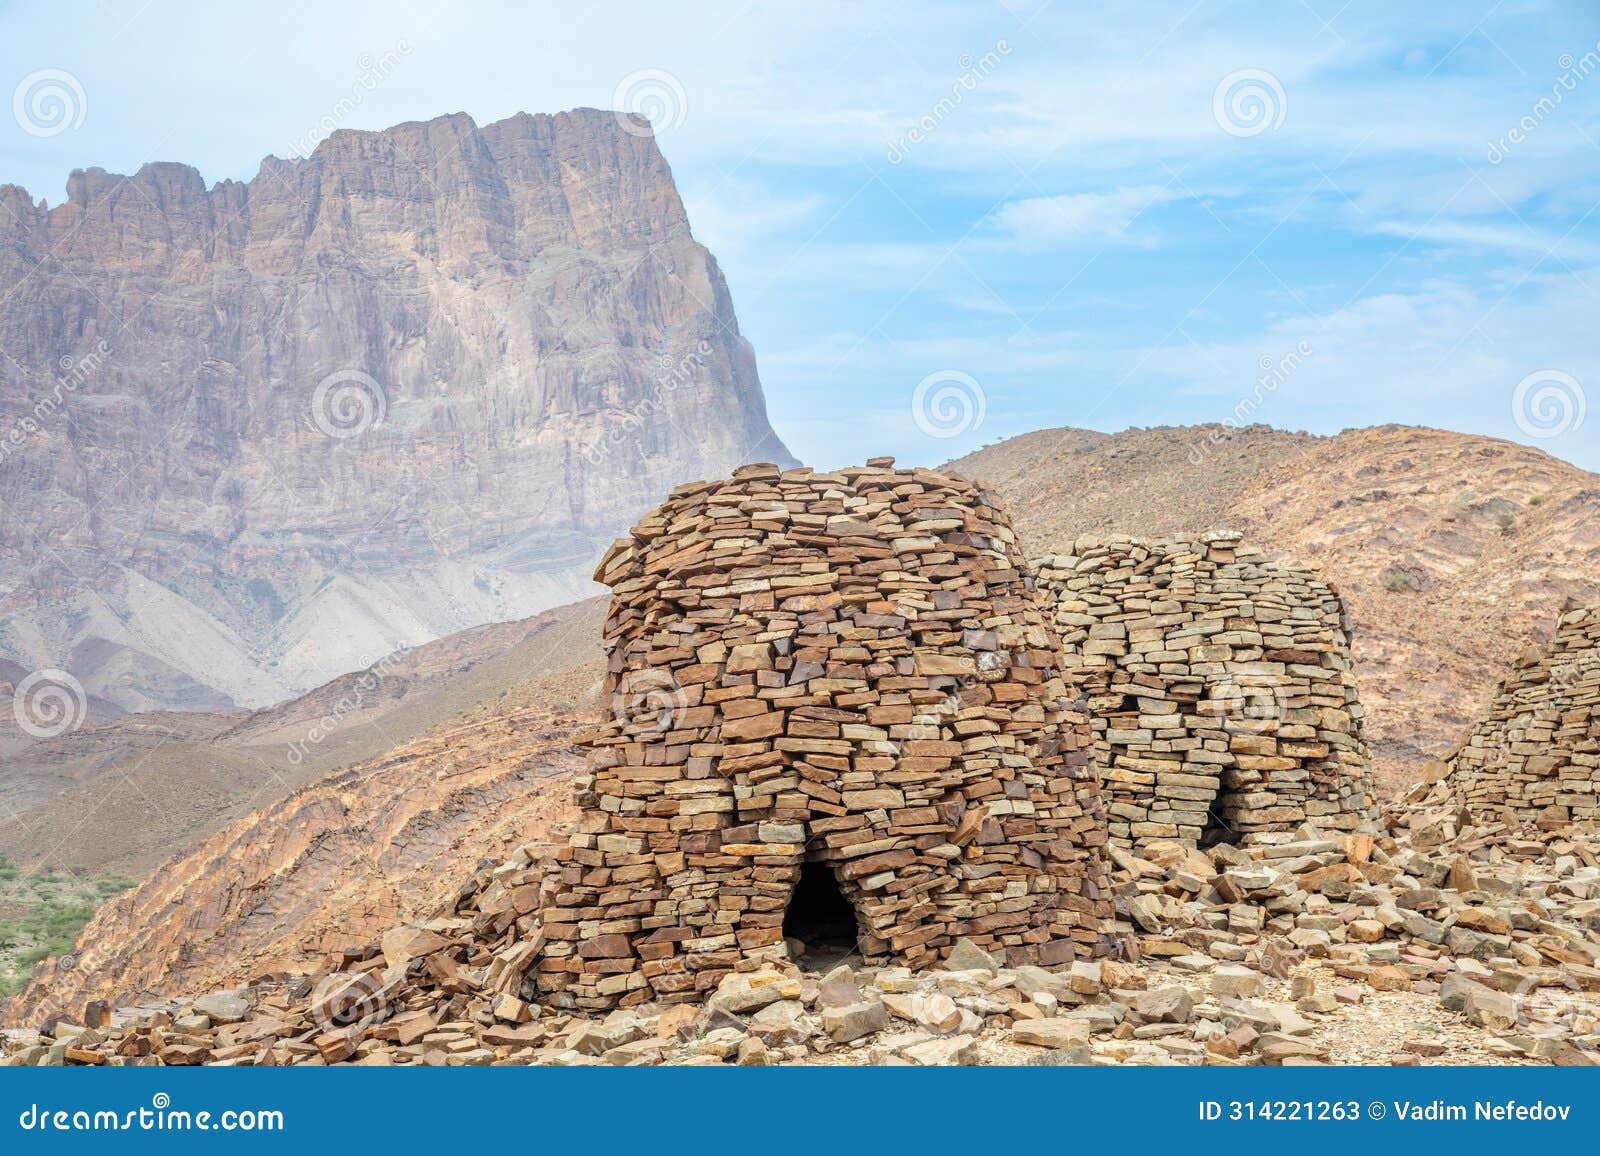 ancient stone beehive tombs with jebel misht mountain in the background, archaeological site near al-ayn, sultanate oman